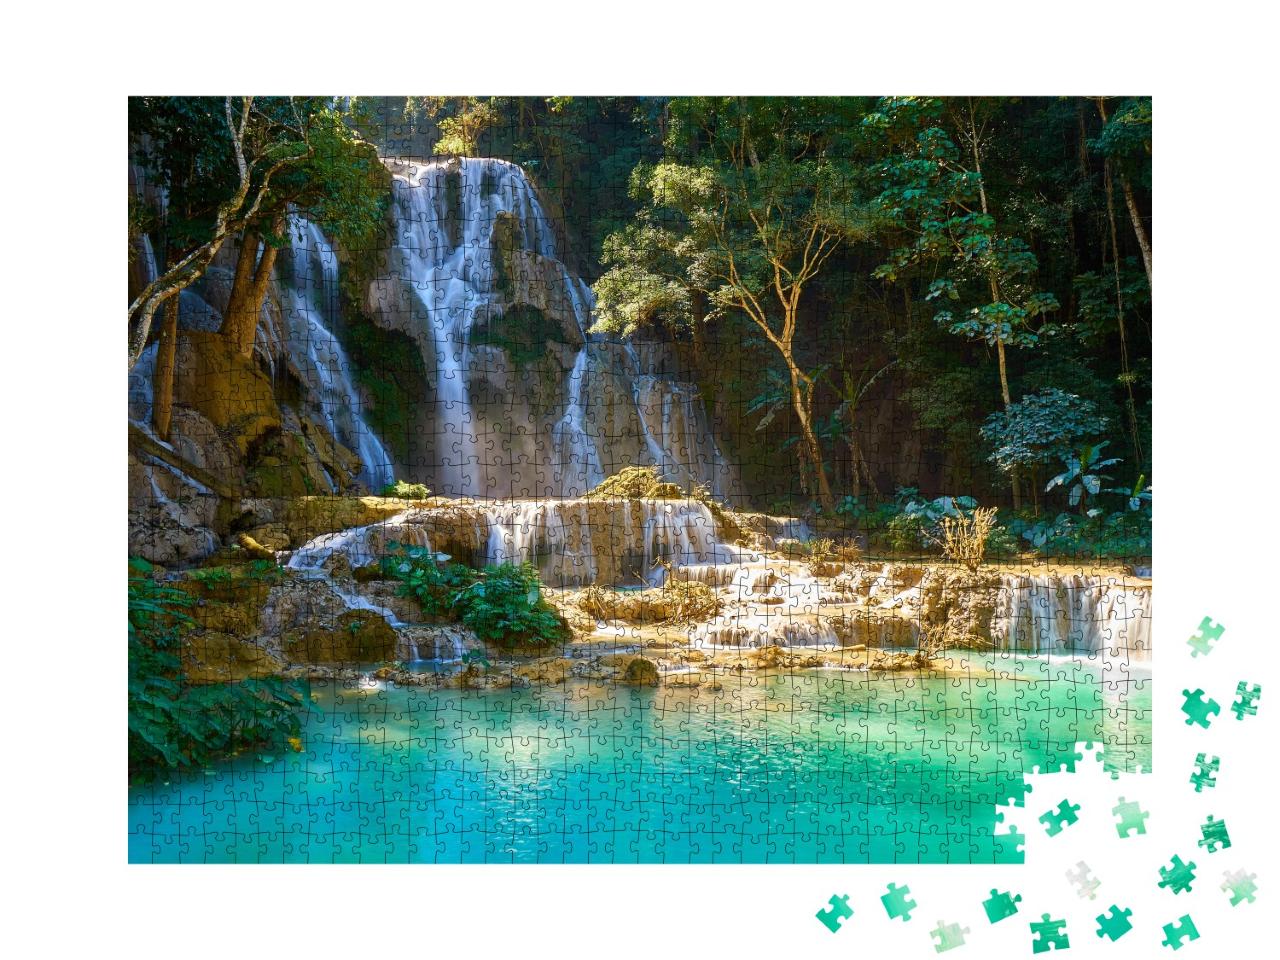 Puzzle 1000 Teile „Beeindruckende Kuang Si Wasserfälle in Luang Probang, Laos“